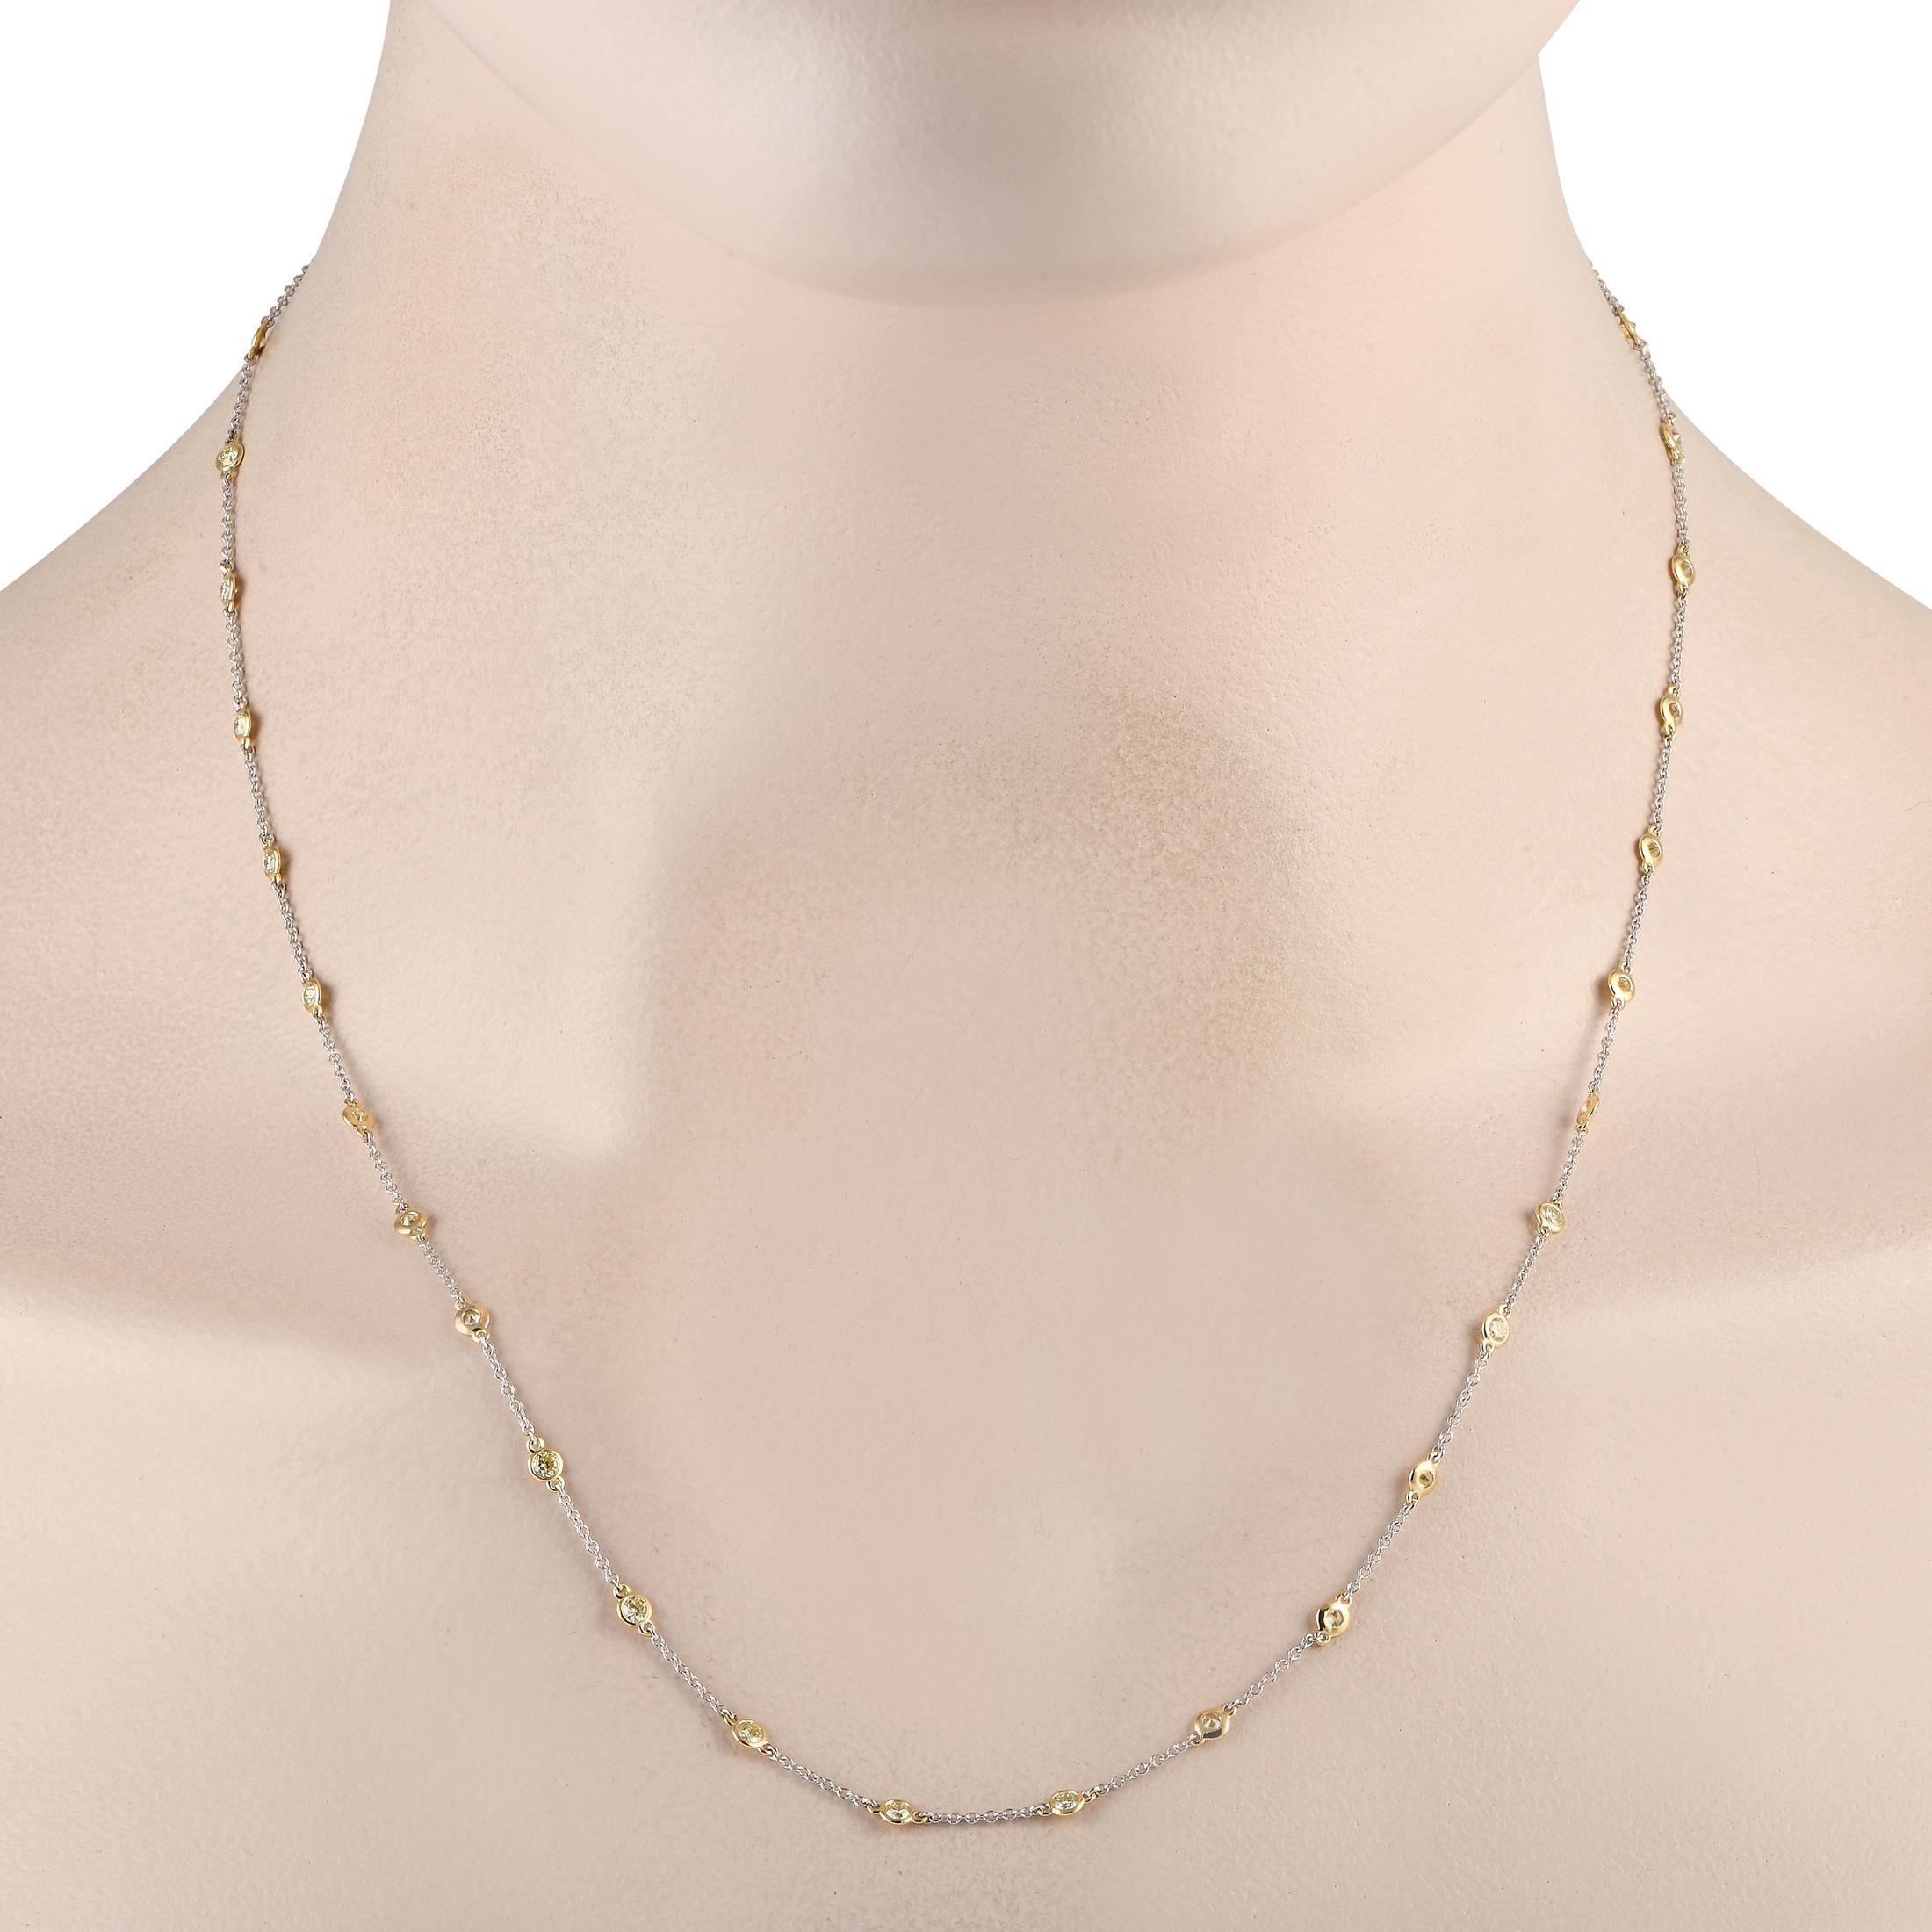 An elegant addition to any outfit. This 20-inch-long necklace is so easy to pair with anything and everything. Shimmering diamonds on evenly-spaced yellow gold bezels run along its white gold chain. It's the perfect accessory to amp the style of a